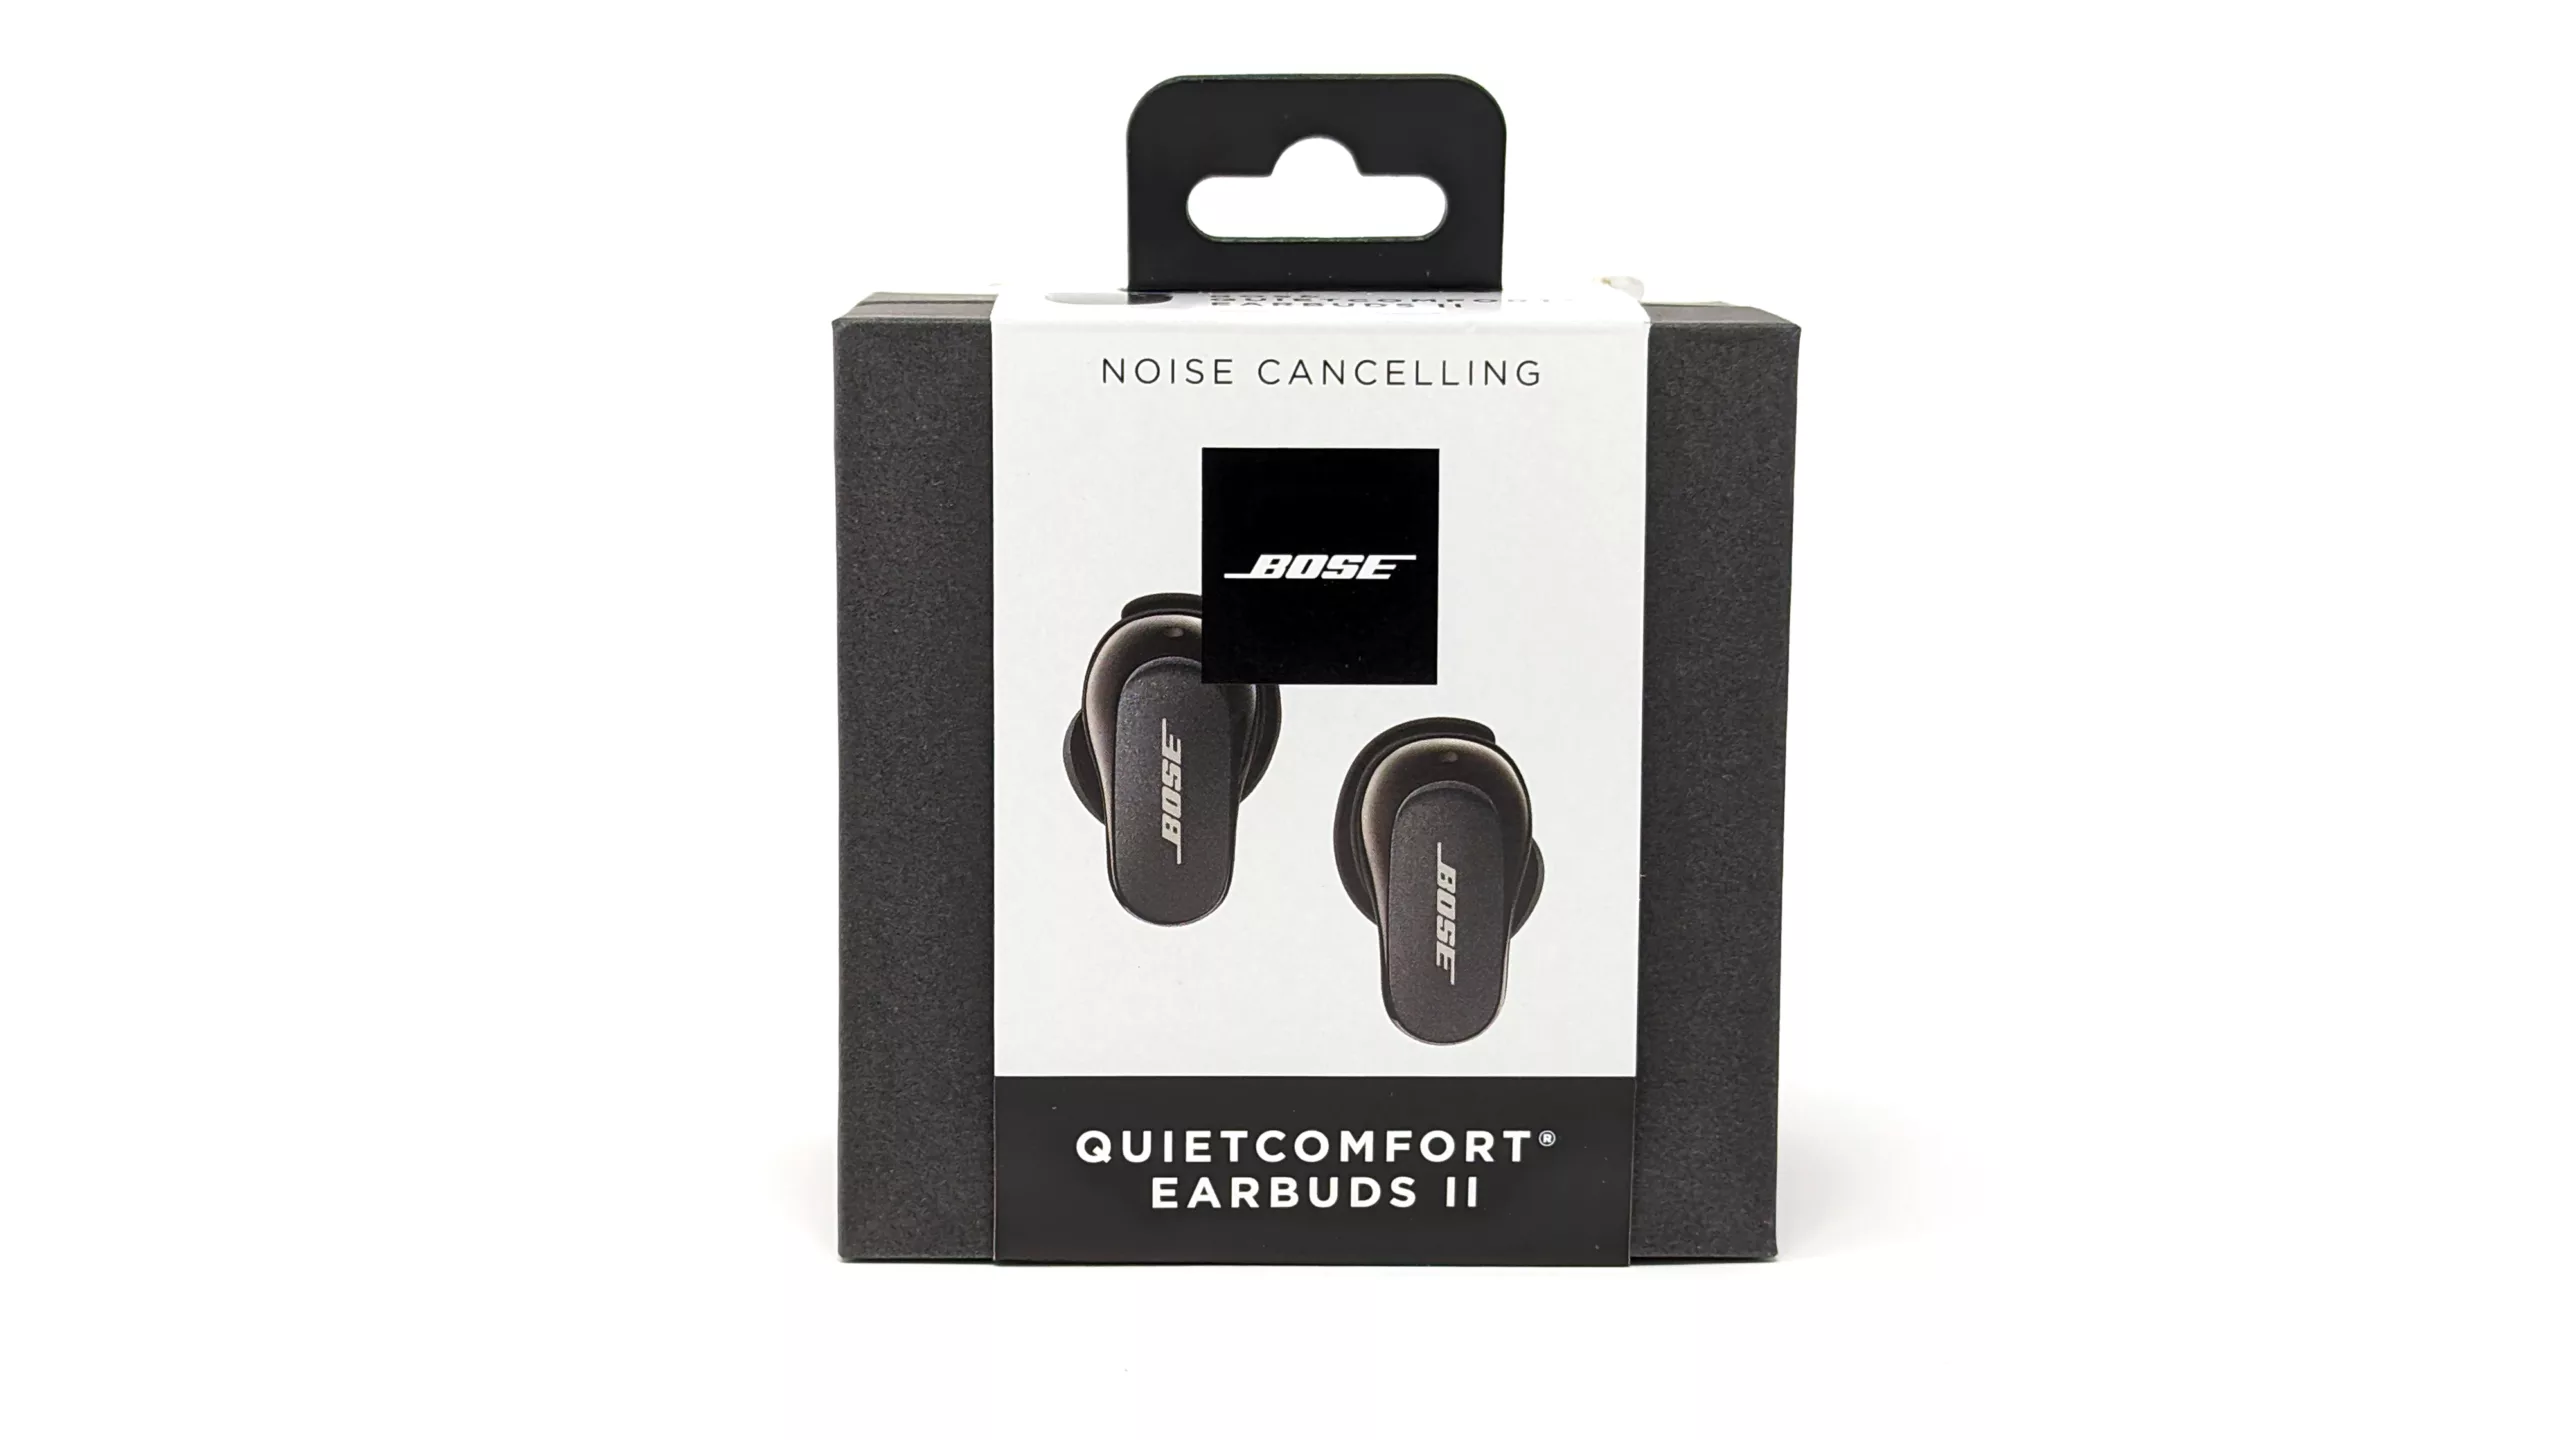 Bose QuietComfort Earbuds II Outside the Box